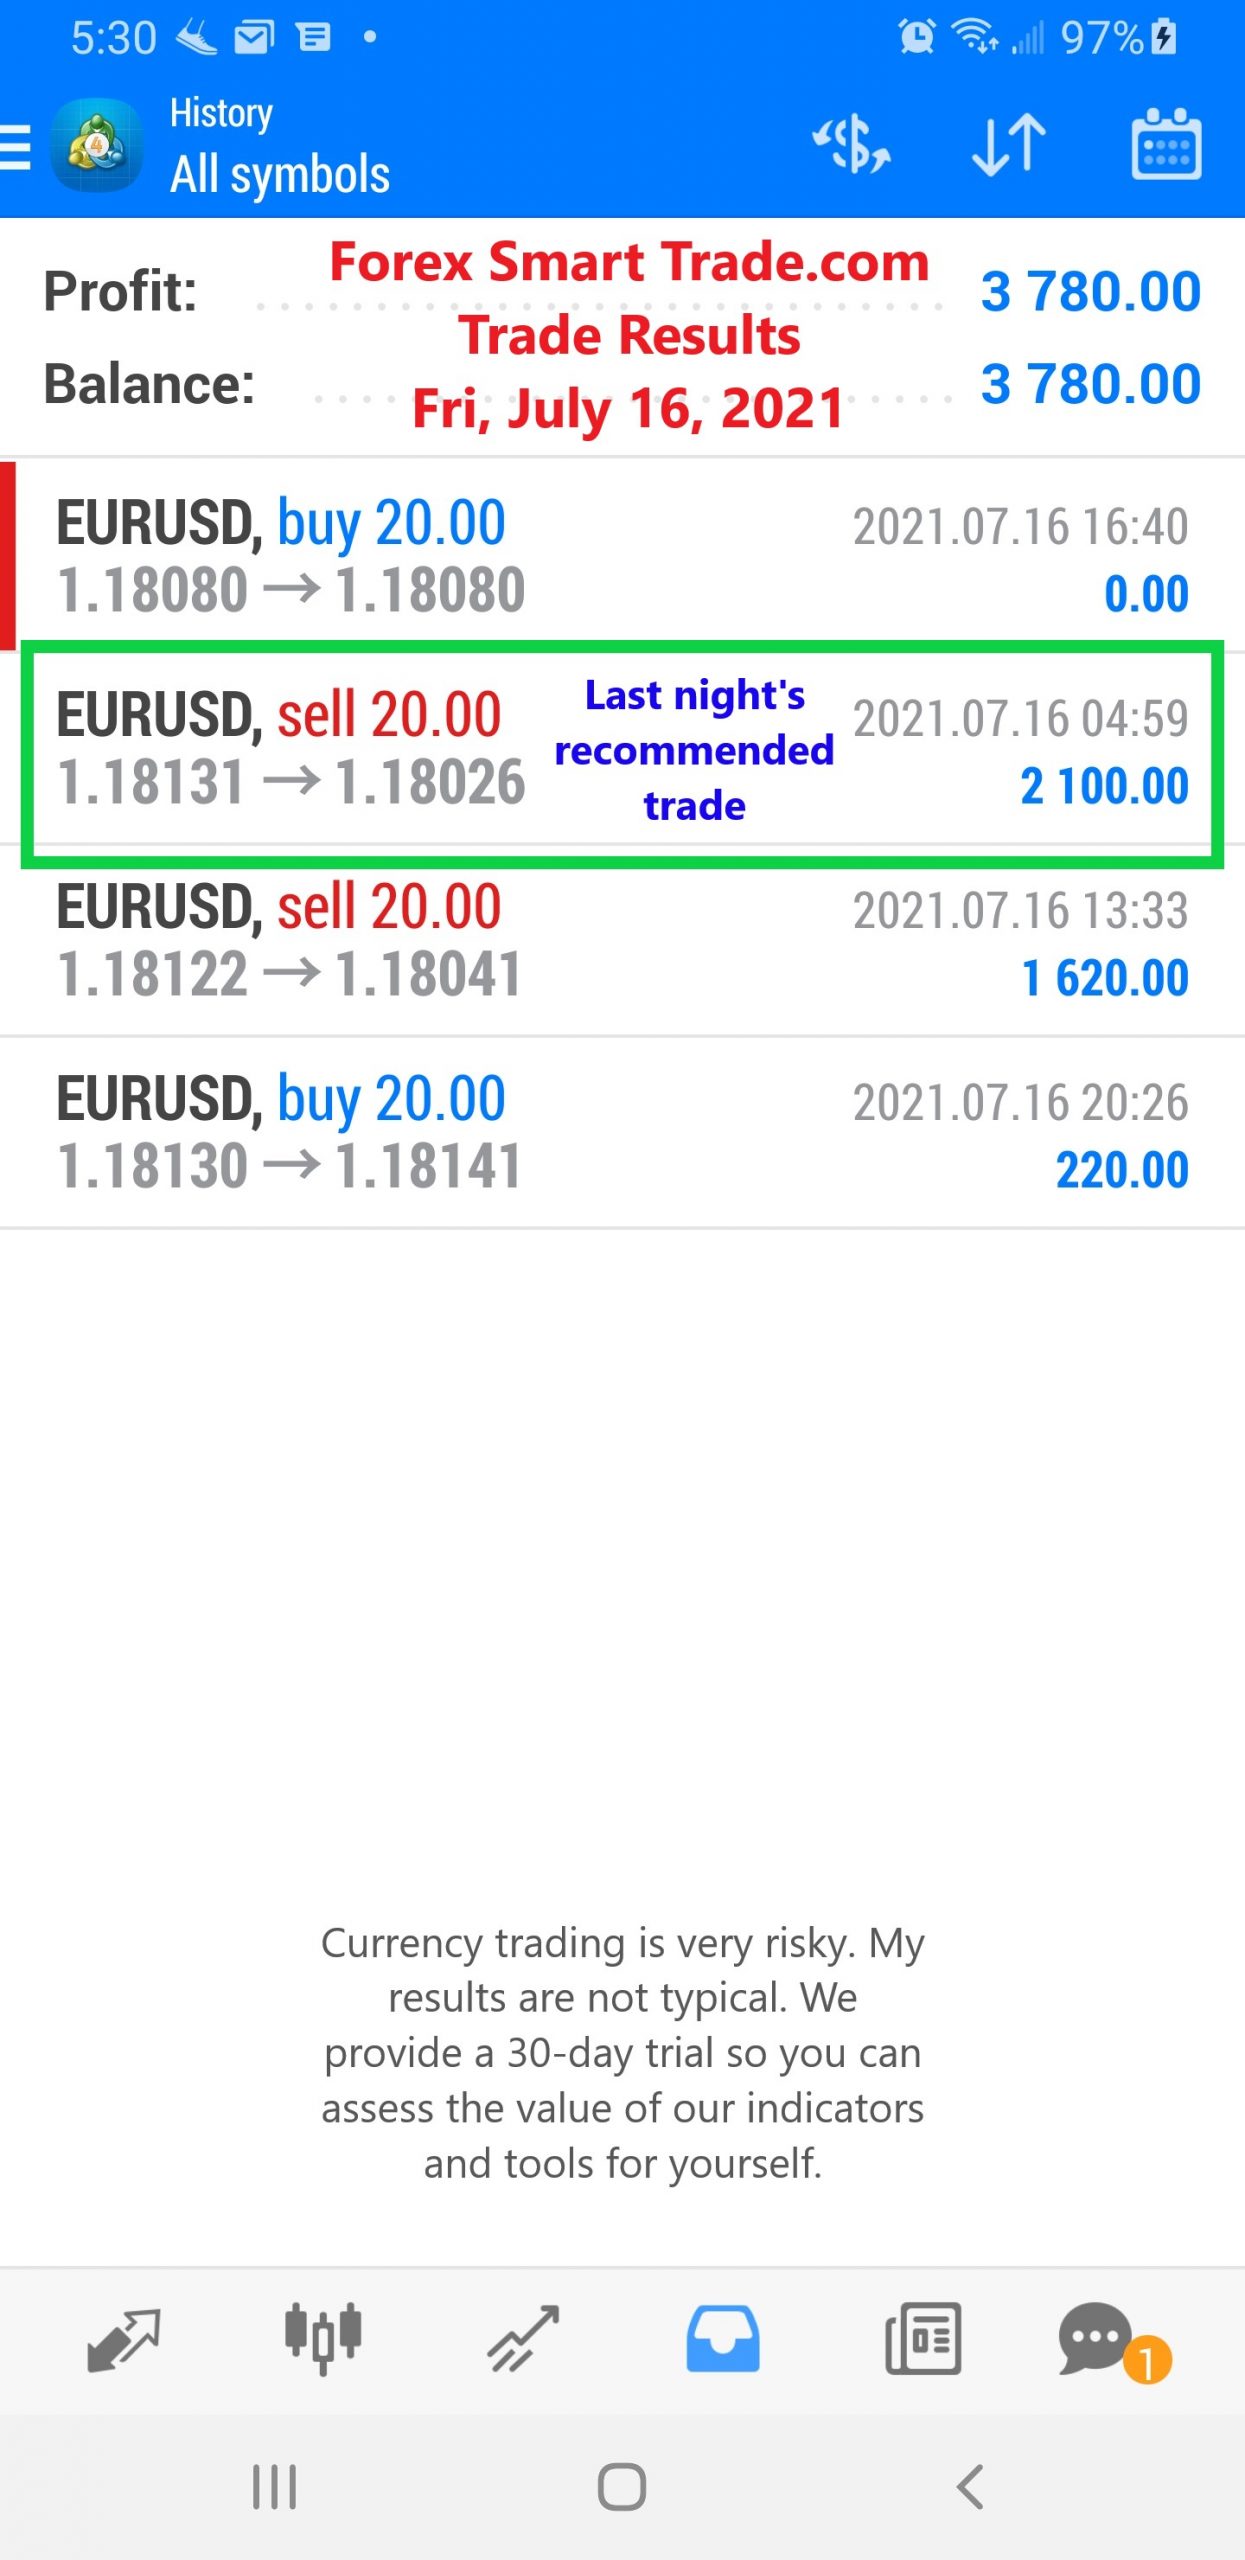 Forex Smart Trade Daily Trade Results - Best Forex Currency Trading Course. 